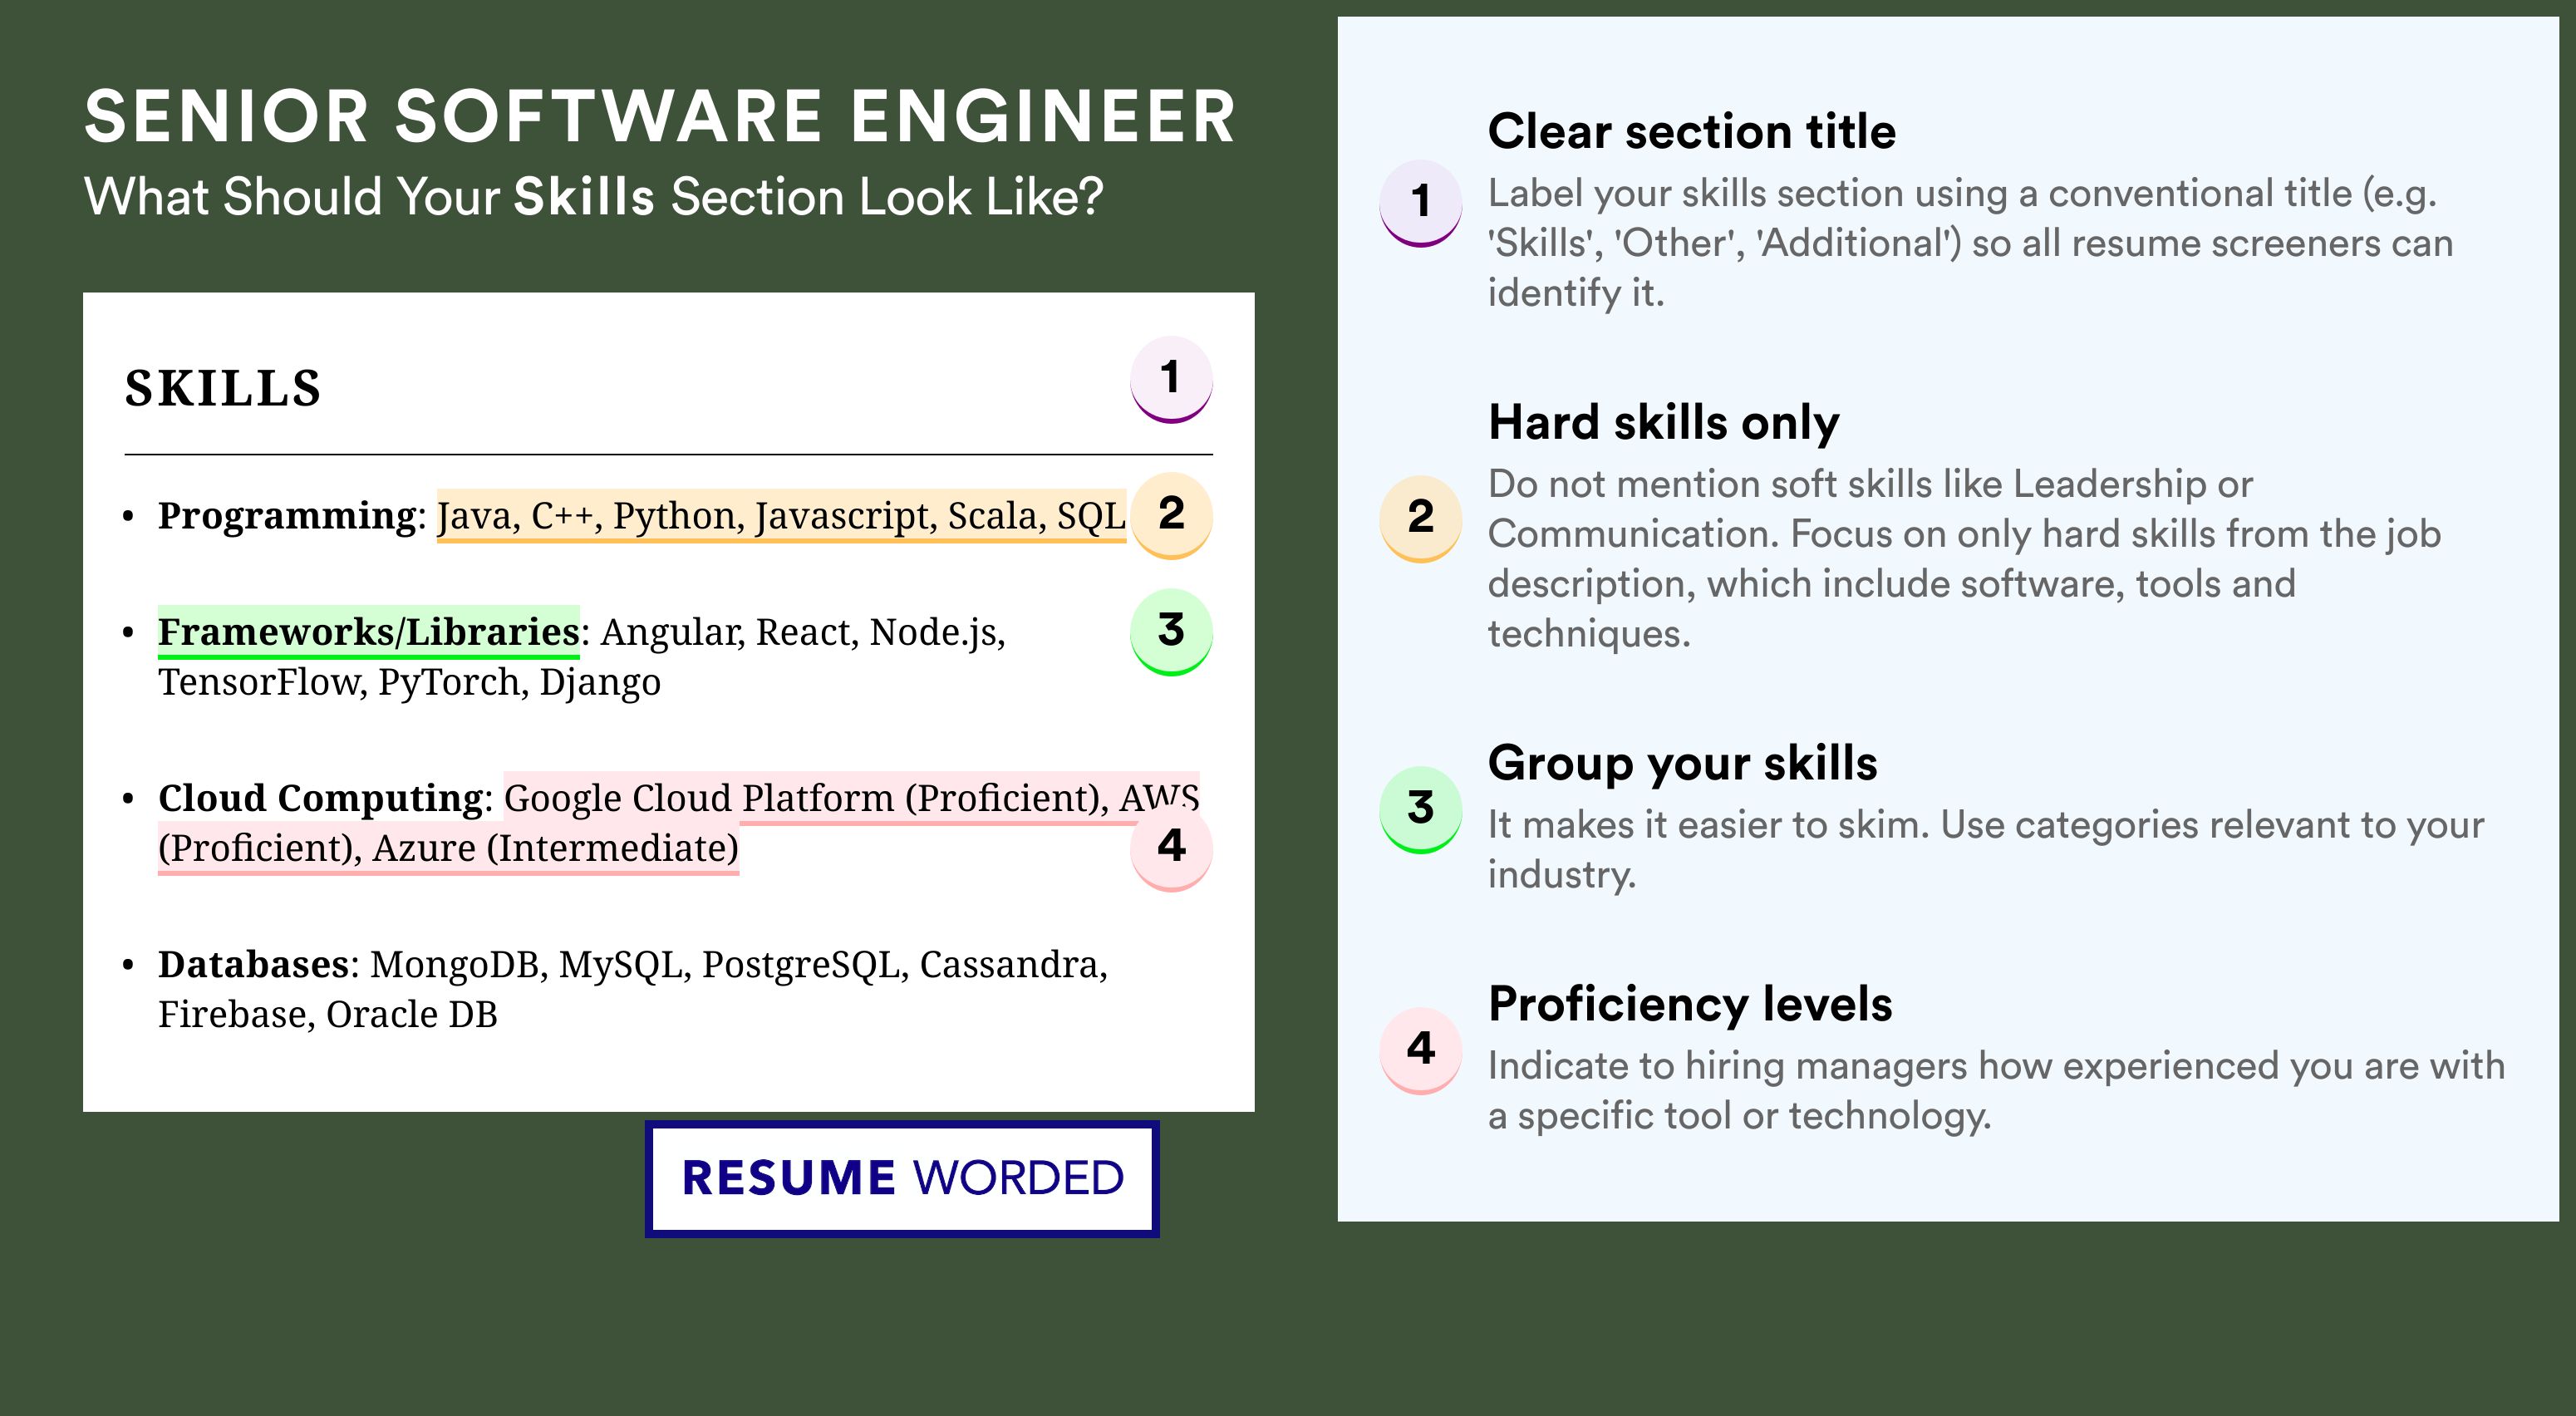 How To Write Your Skills Section - Senior Software Engineer Roles